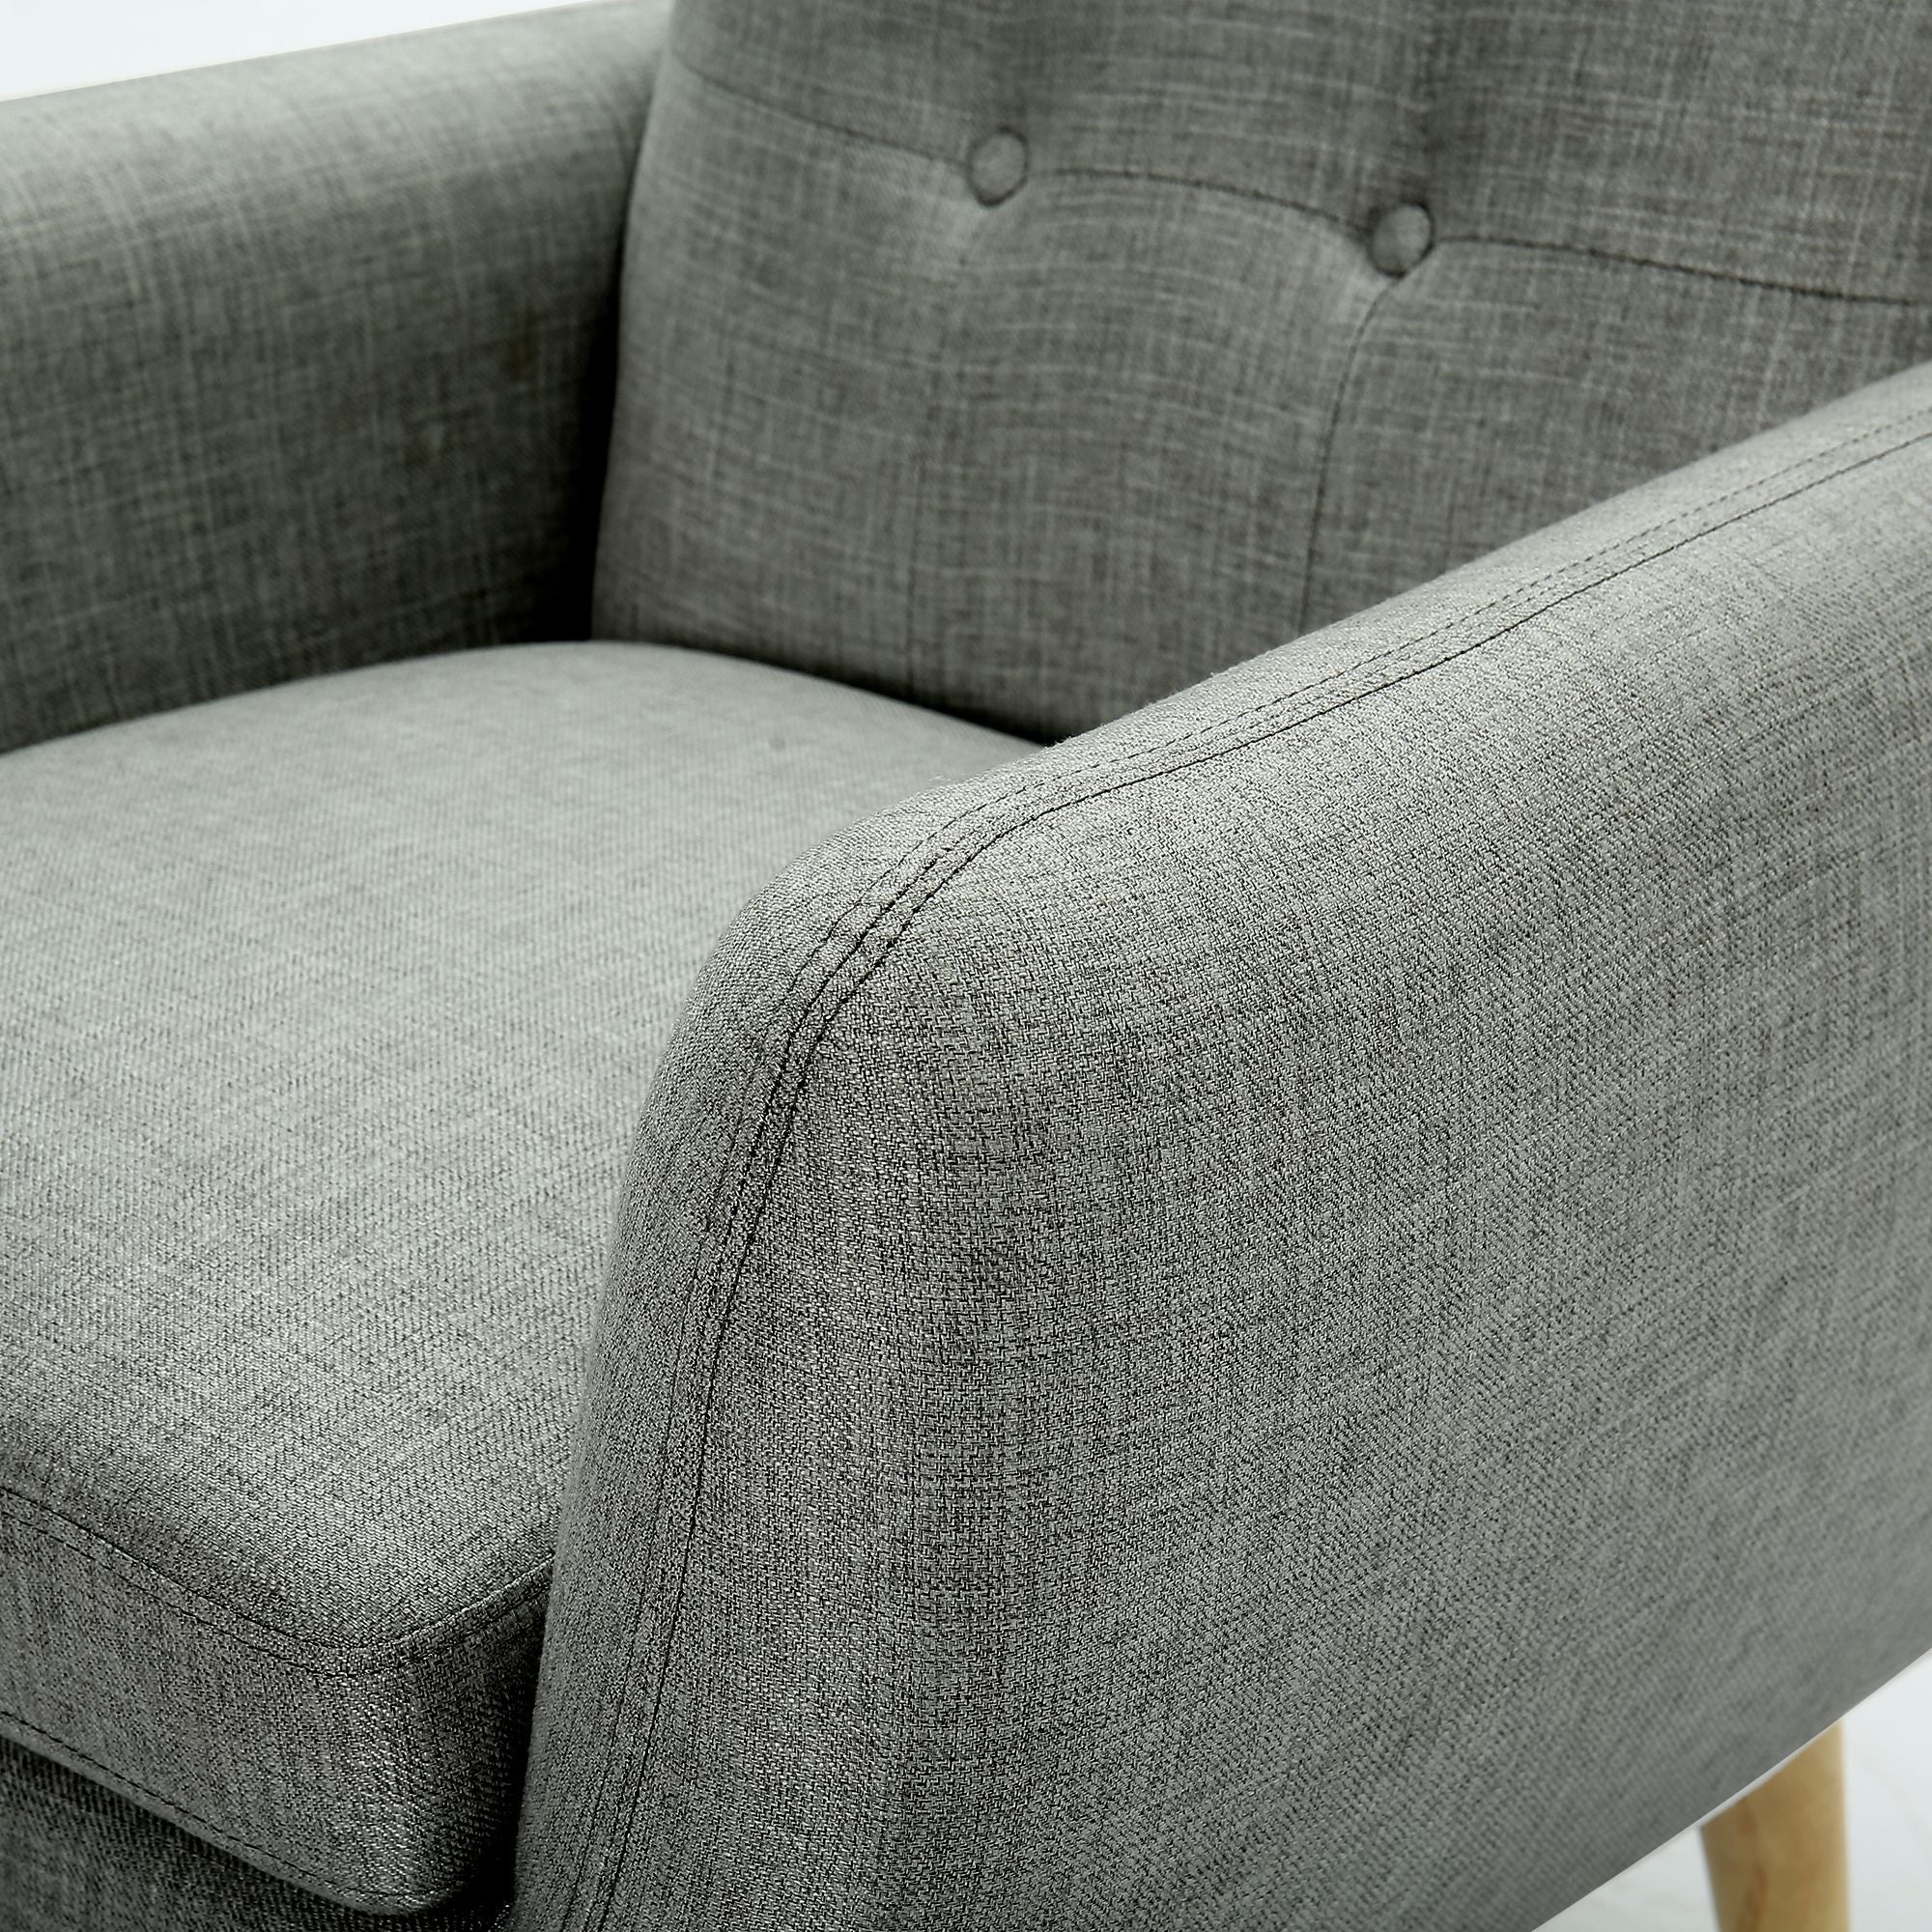 Ollen Single Seater Fabric Upholstered Sofa Armchair Lounge Couch - Mid Grey - Notbrand